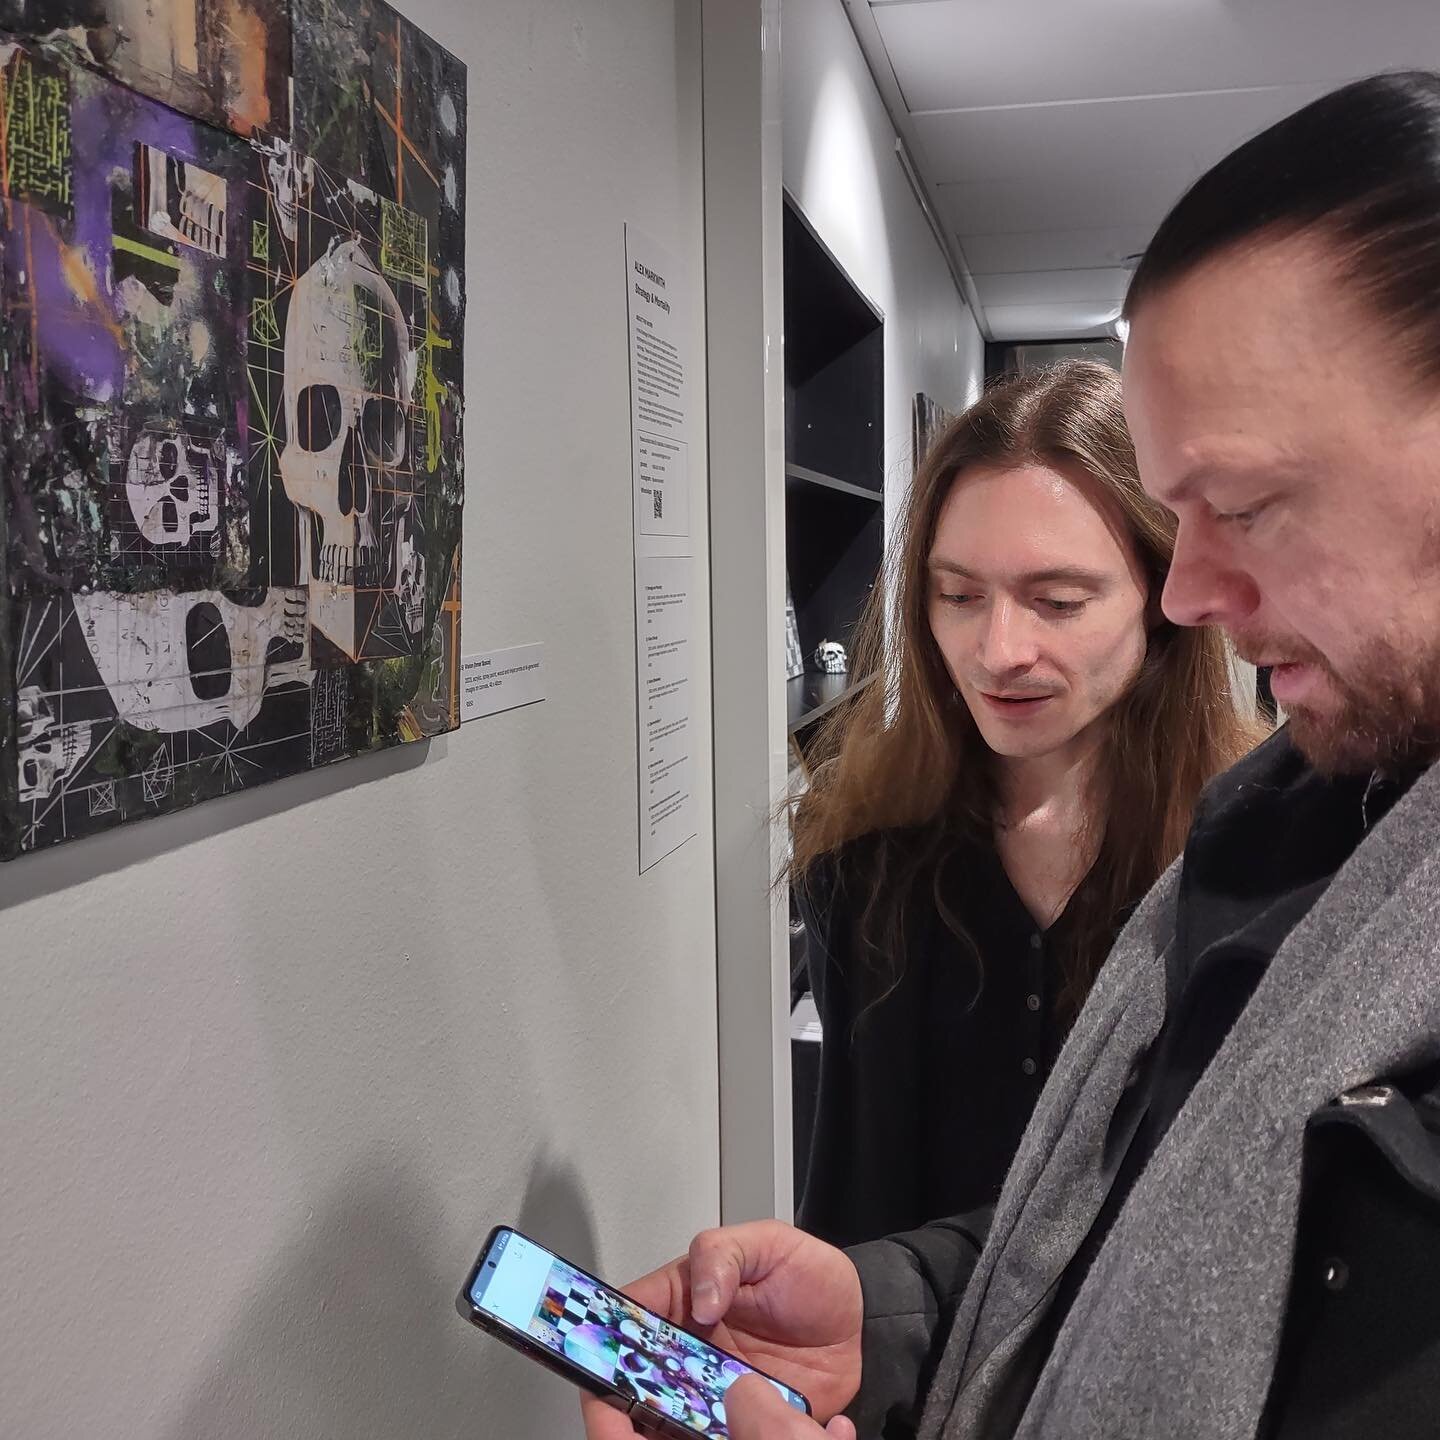 Yesterday with @grymjori - brainstorming the next phase of AI interaction.
 
Paintings from the &ldquo;Strategy &amp; Mortality&rdquo; series are now on view and available at Innovation Home Kamppi, open M-F 8:30-16:30.
 
Photos by @pauliinagrym - so